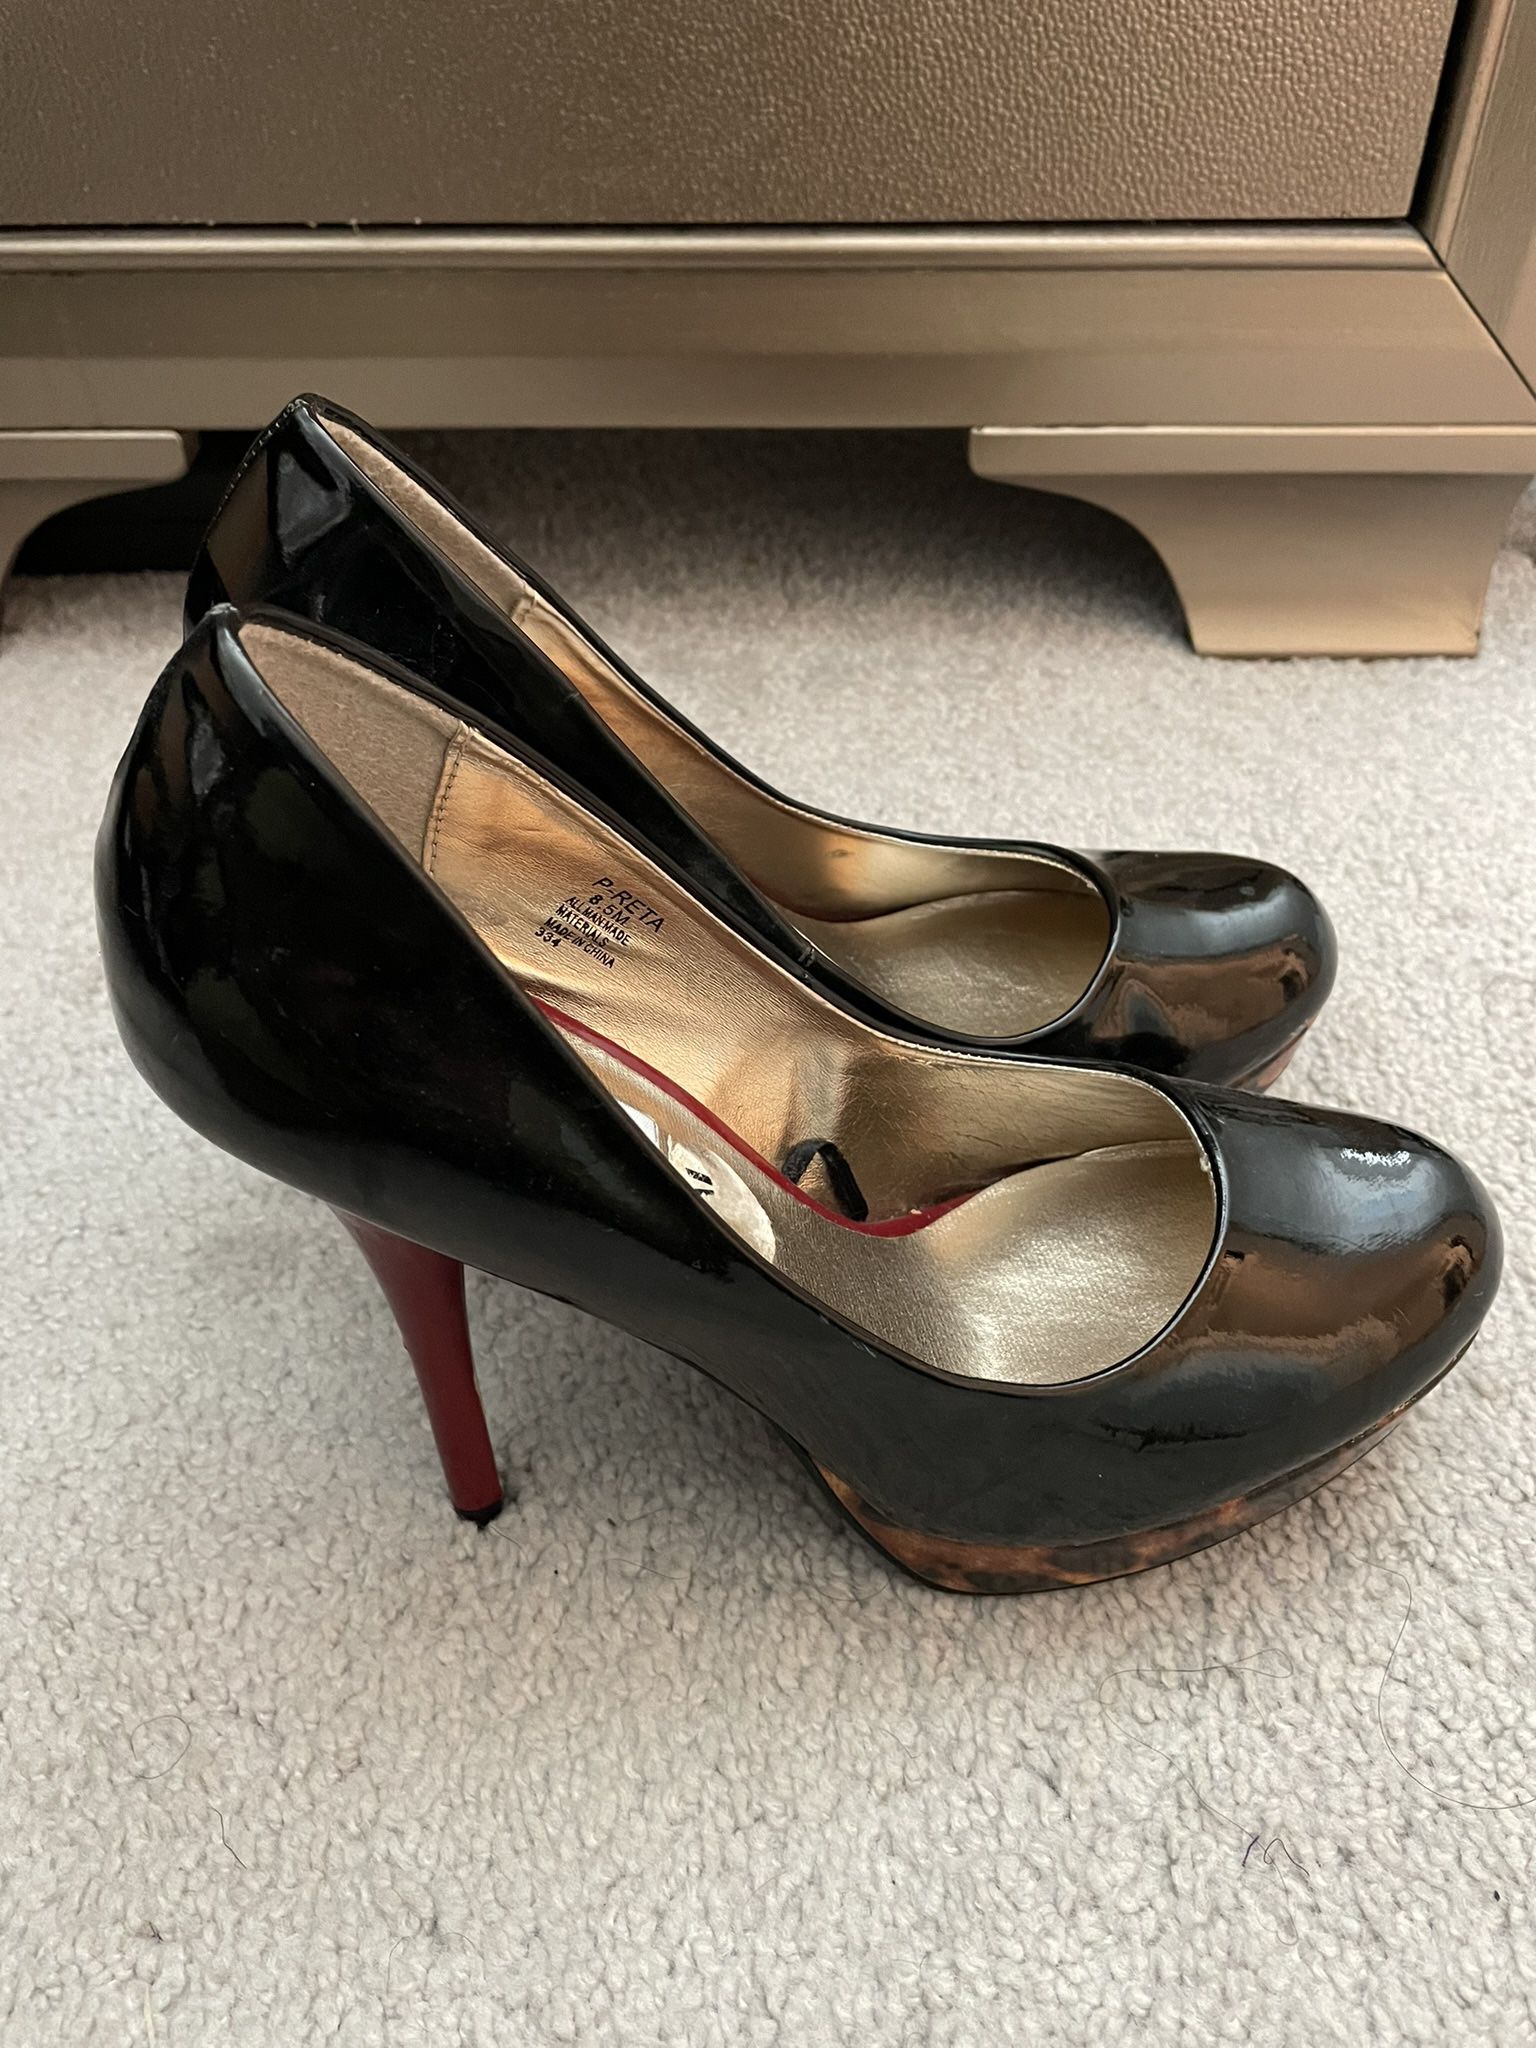 Black With Red And Cheetah Print Accent Heels (Sz. 8)